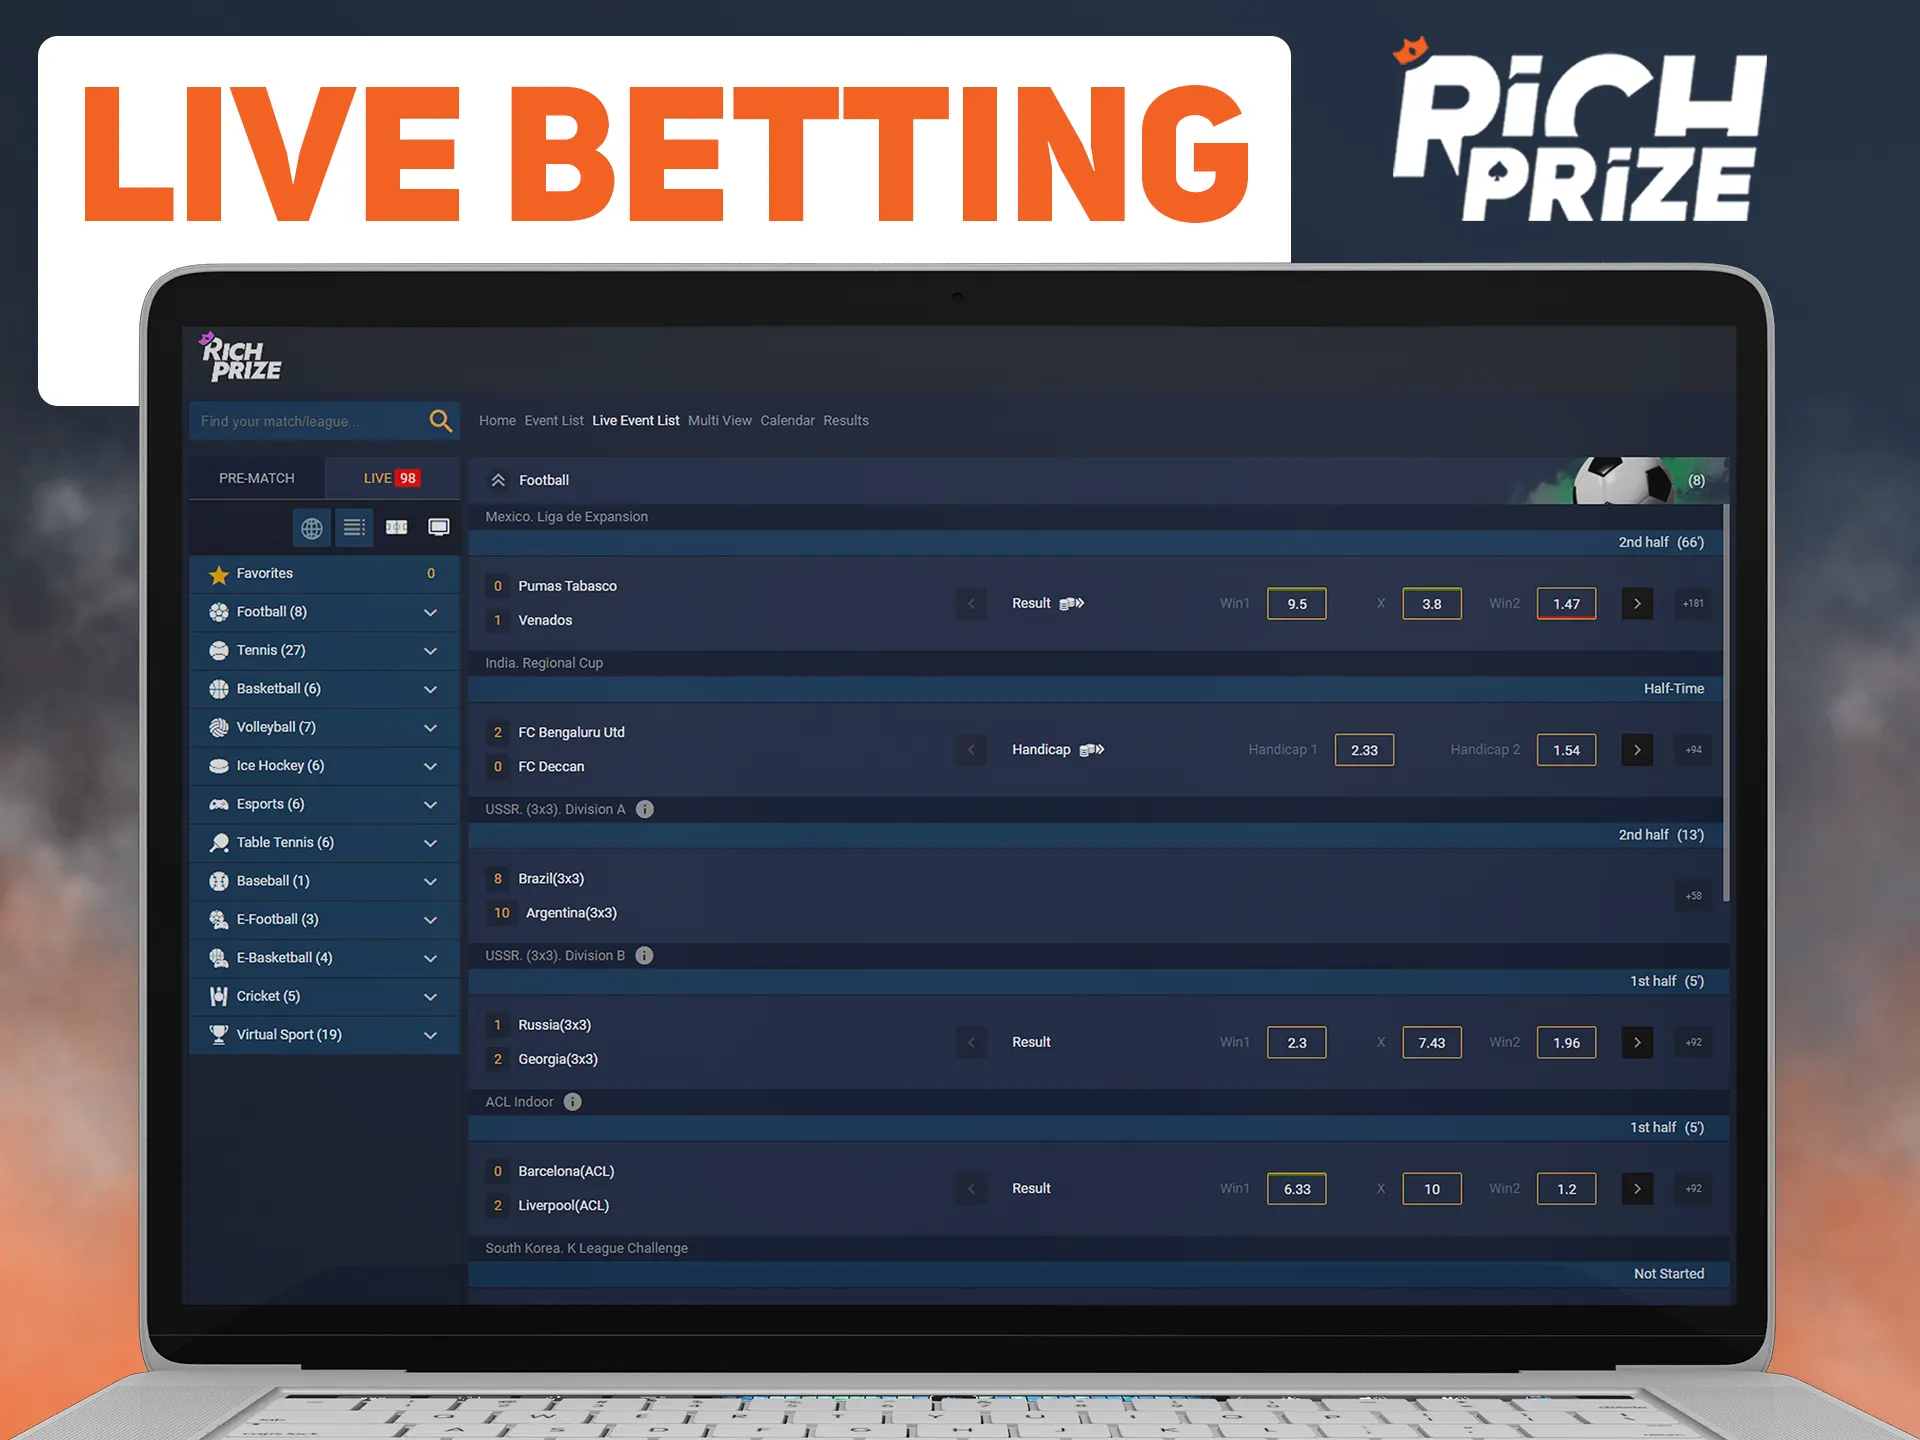 Bet in live format at Richprize.